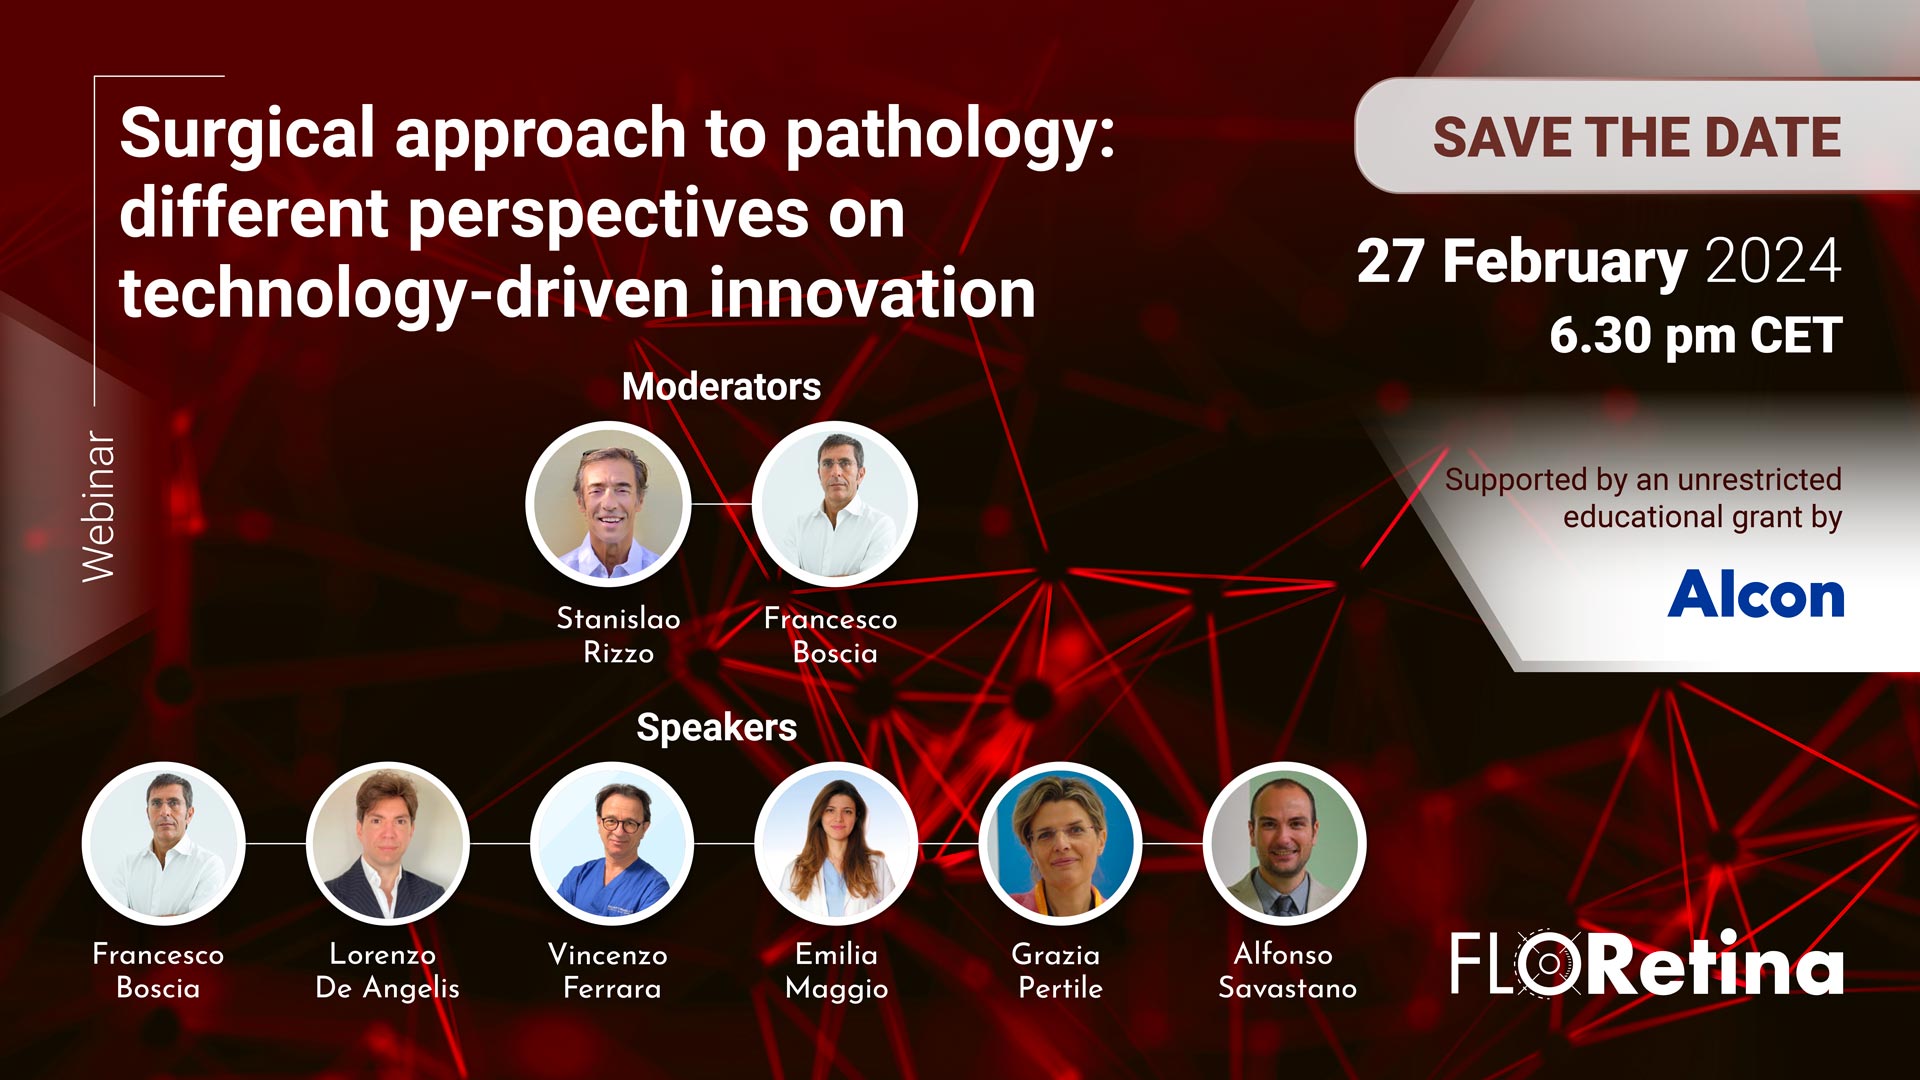 Surgical approach to pathology: different perspectives on technology-driven innovation